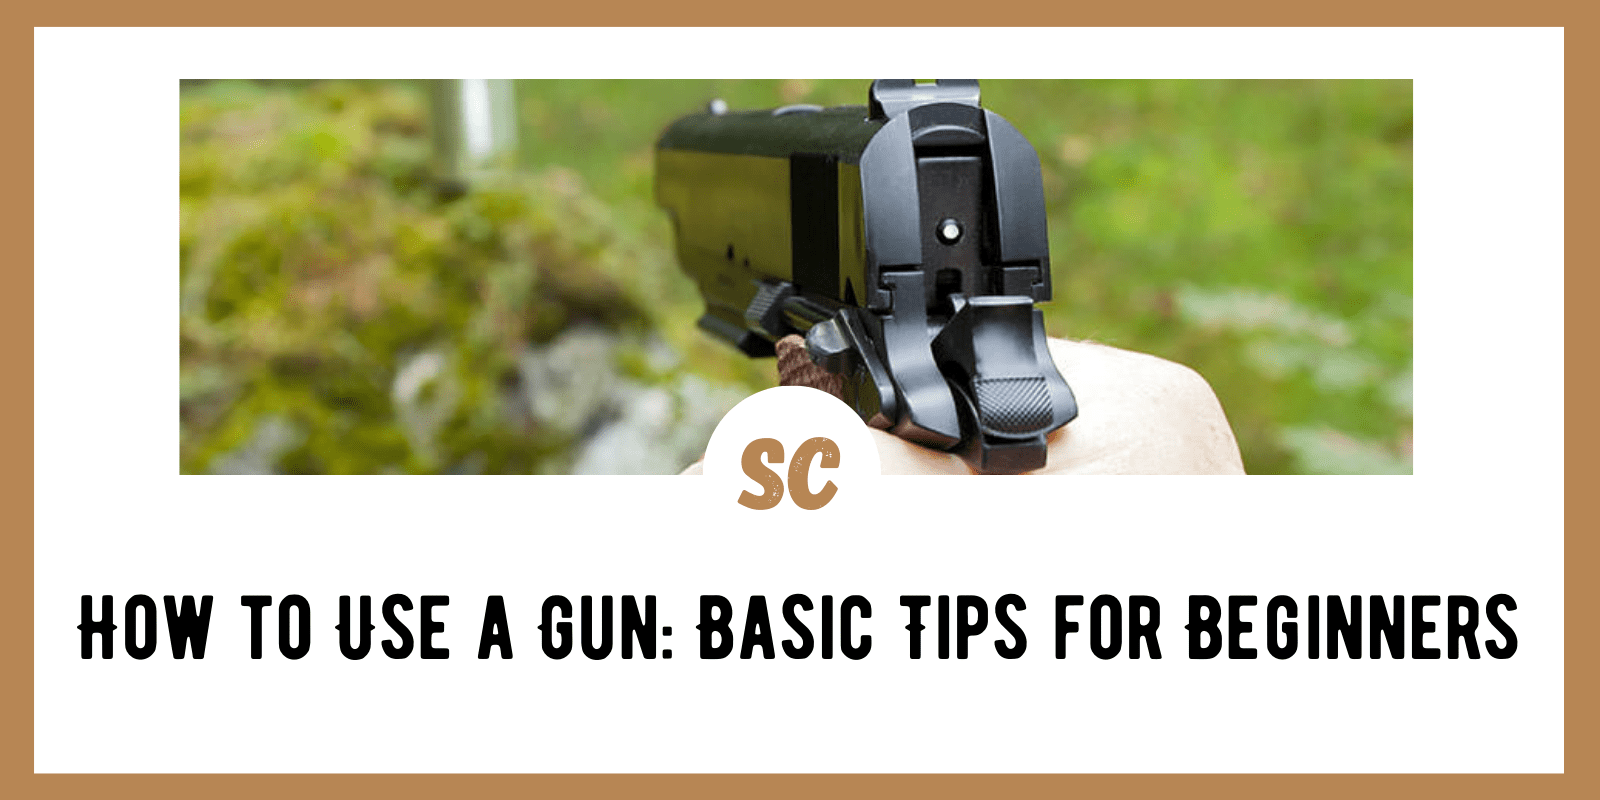 How to Use a Gun: Basic Tips for Beginners